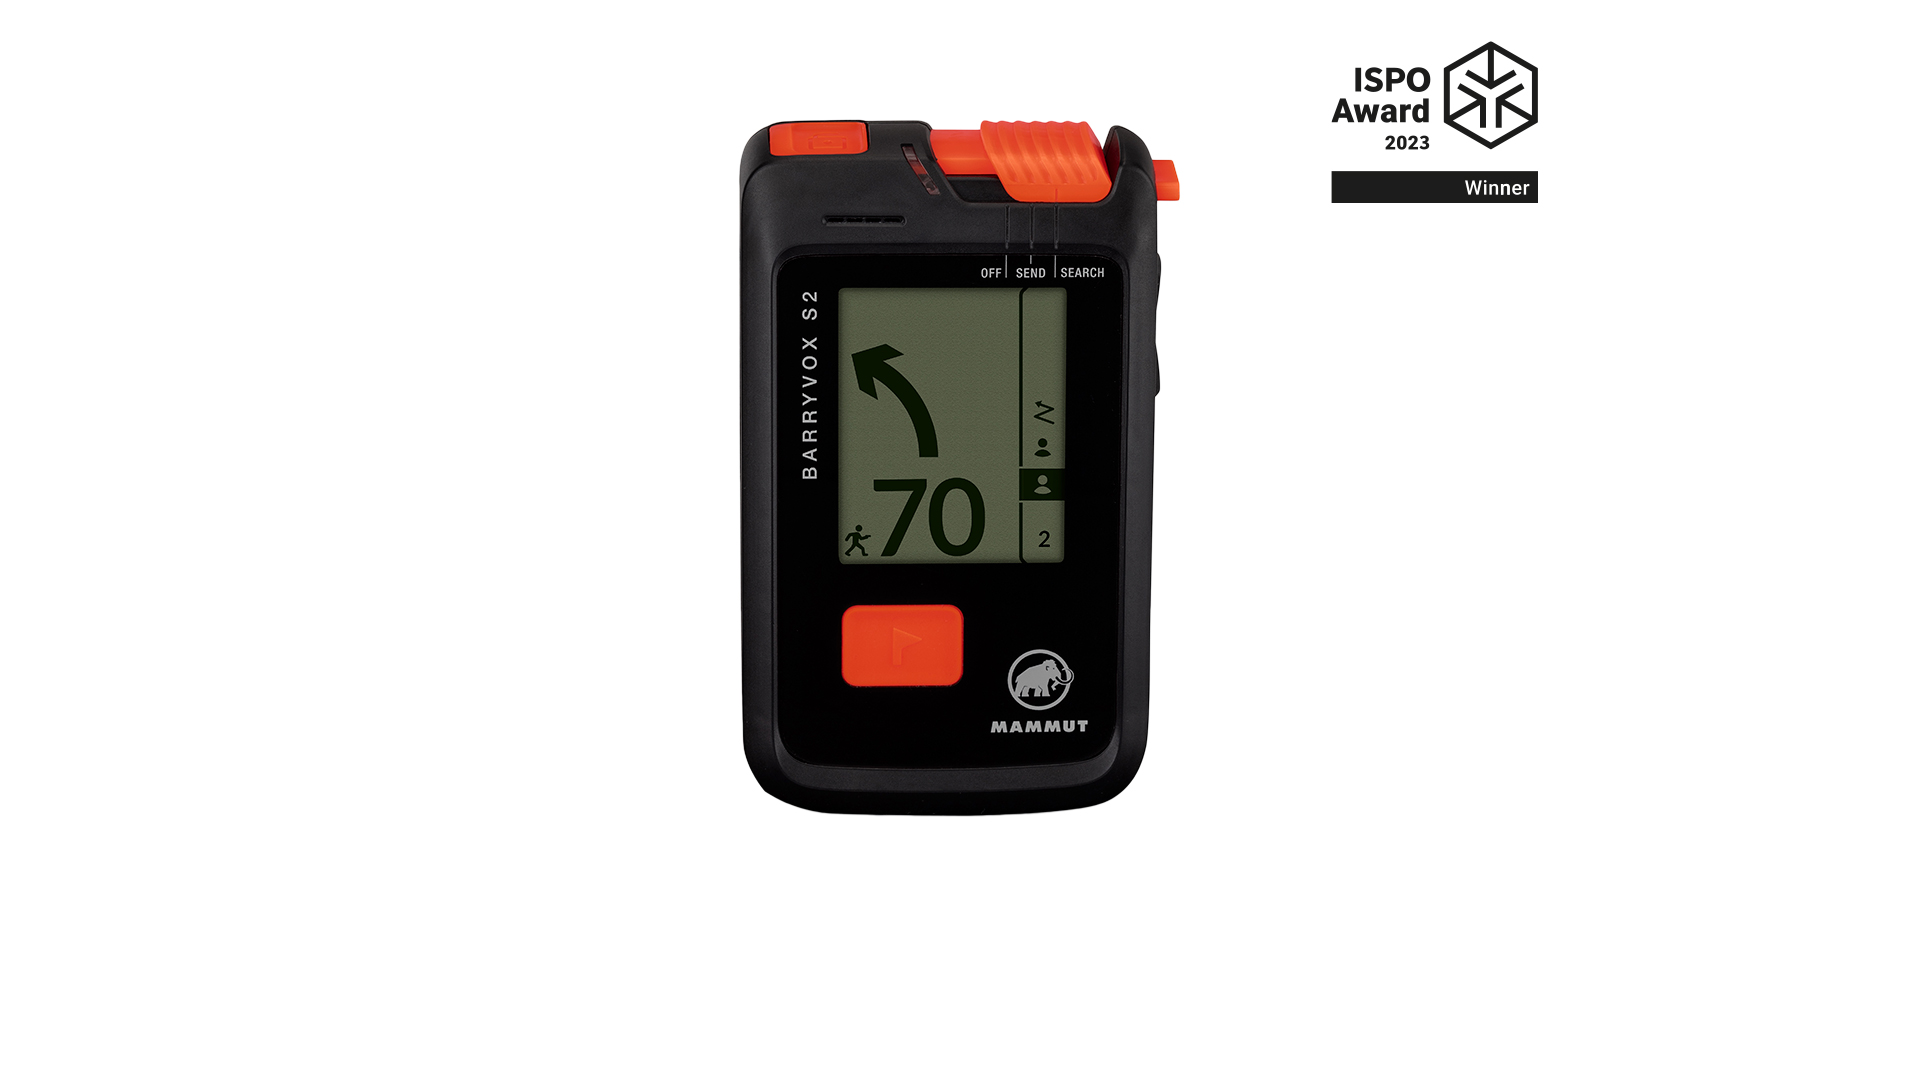 Barryvox® S2 avalanche transceiver from Mammut wins ISPO Award